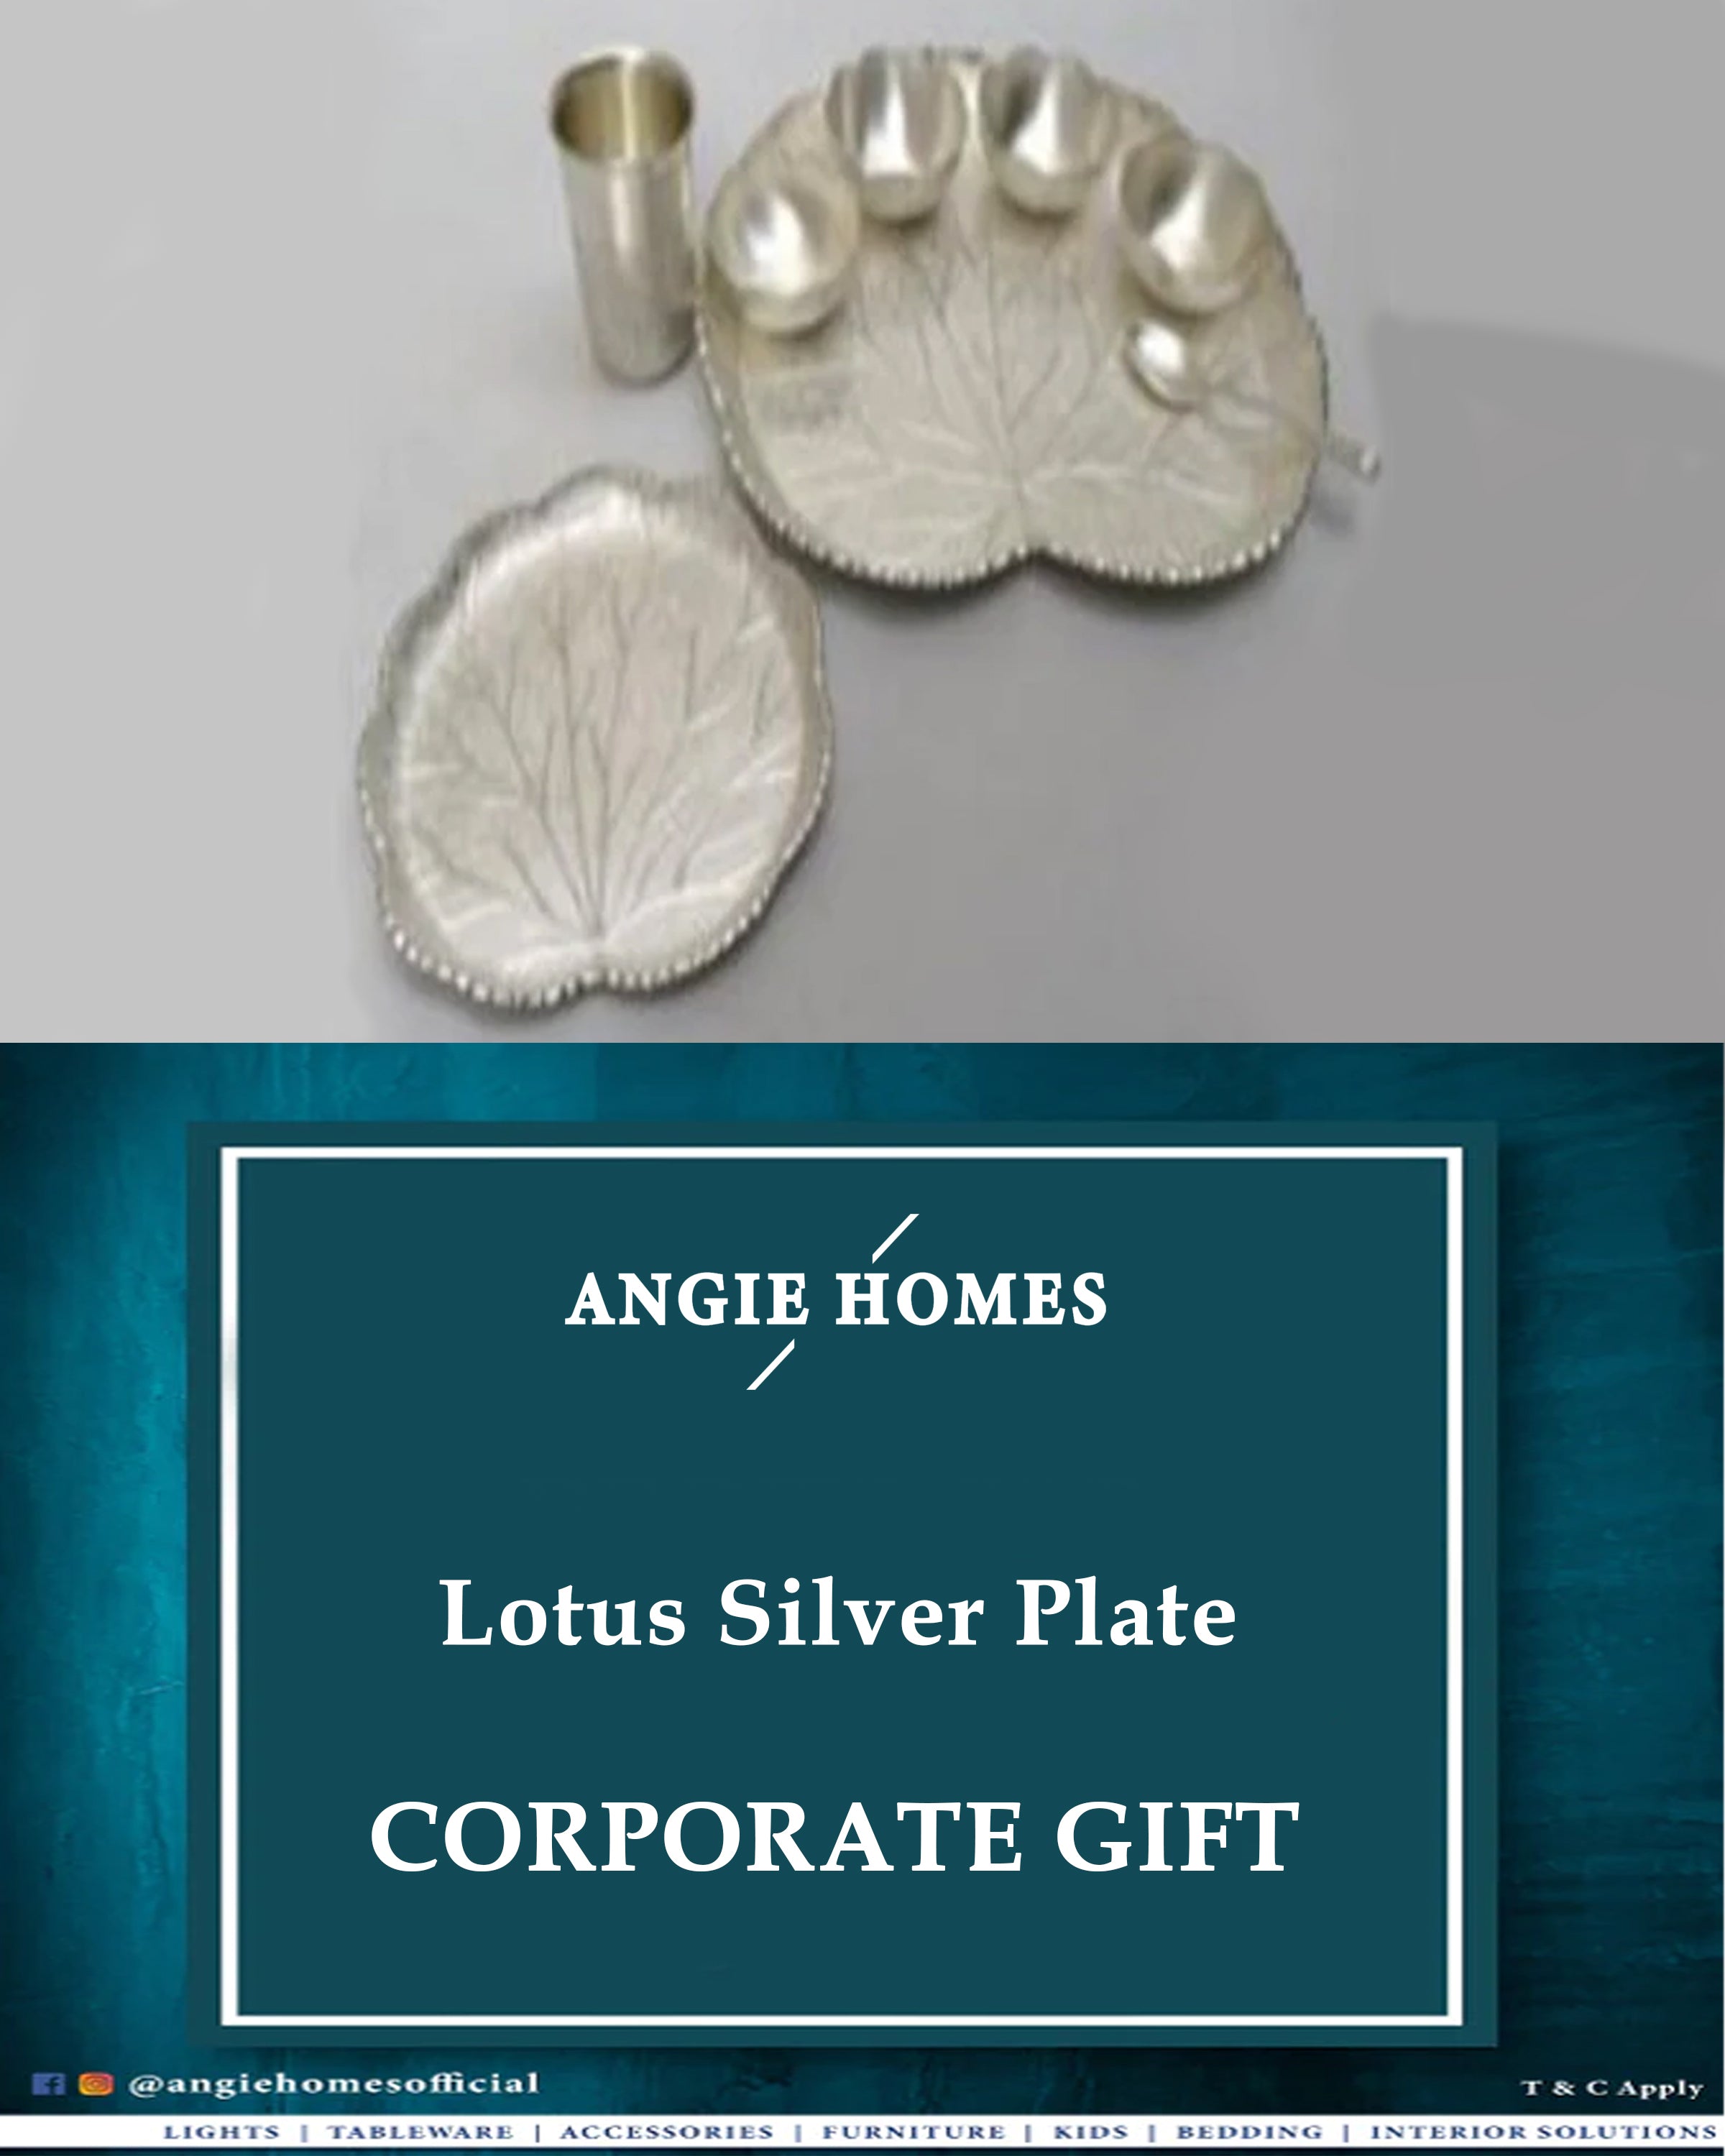 Lotus Silver Plate for Wedding, House Warming & Corporate Gift ANGIE HOMES